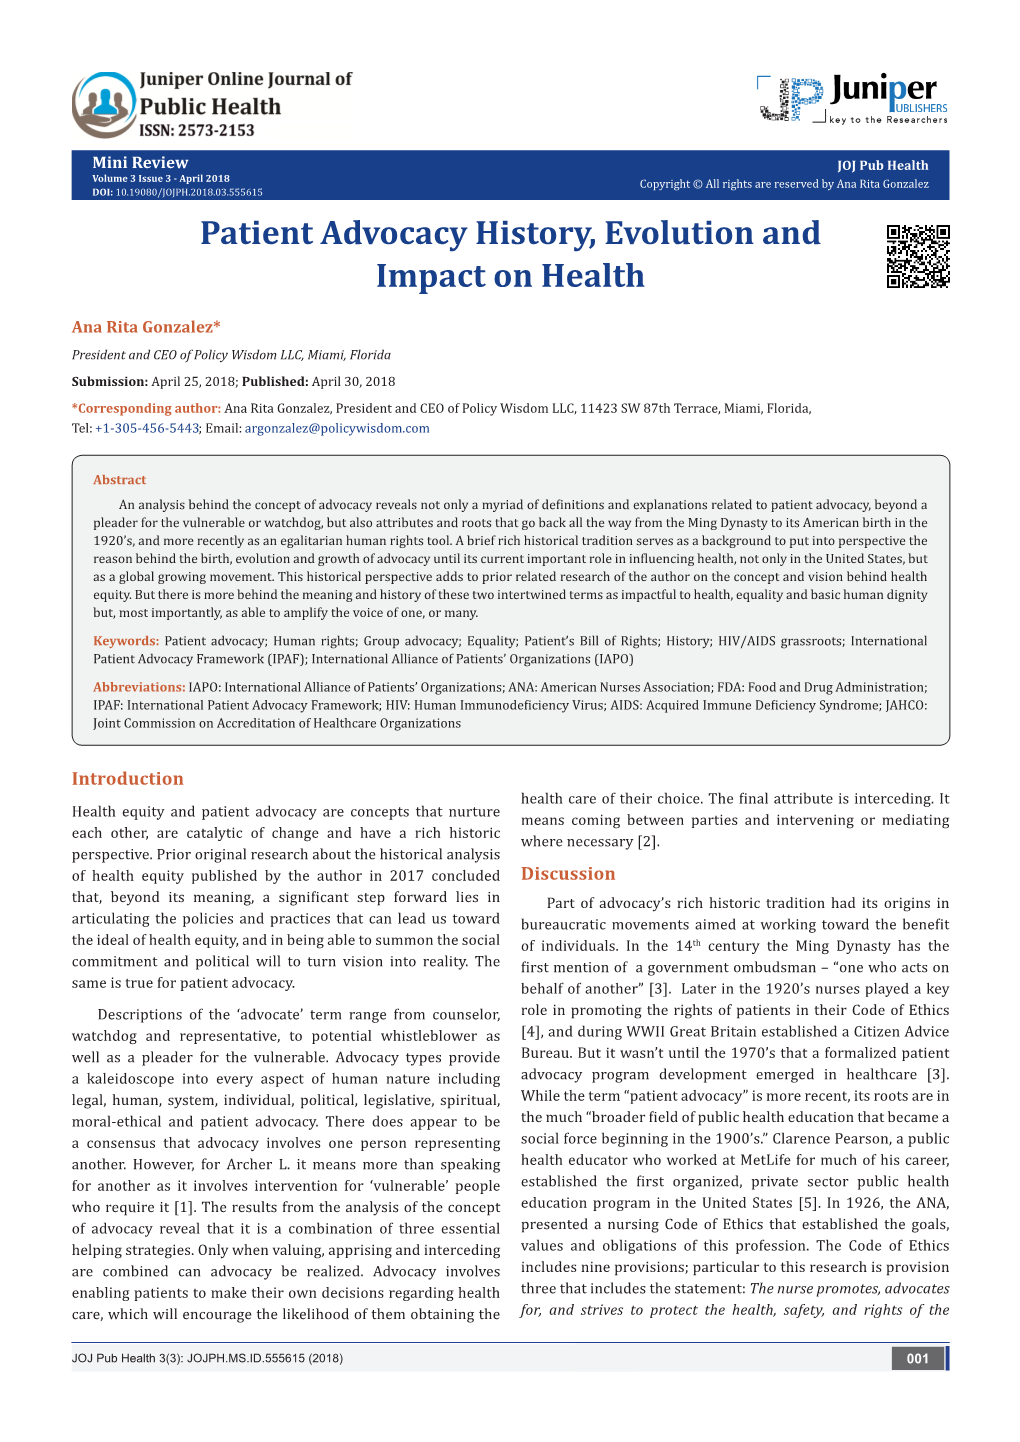 Patient Advocacy History, Evolution and Impact on Health